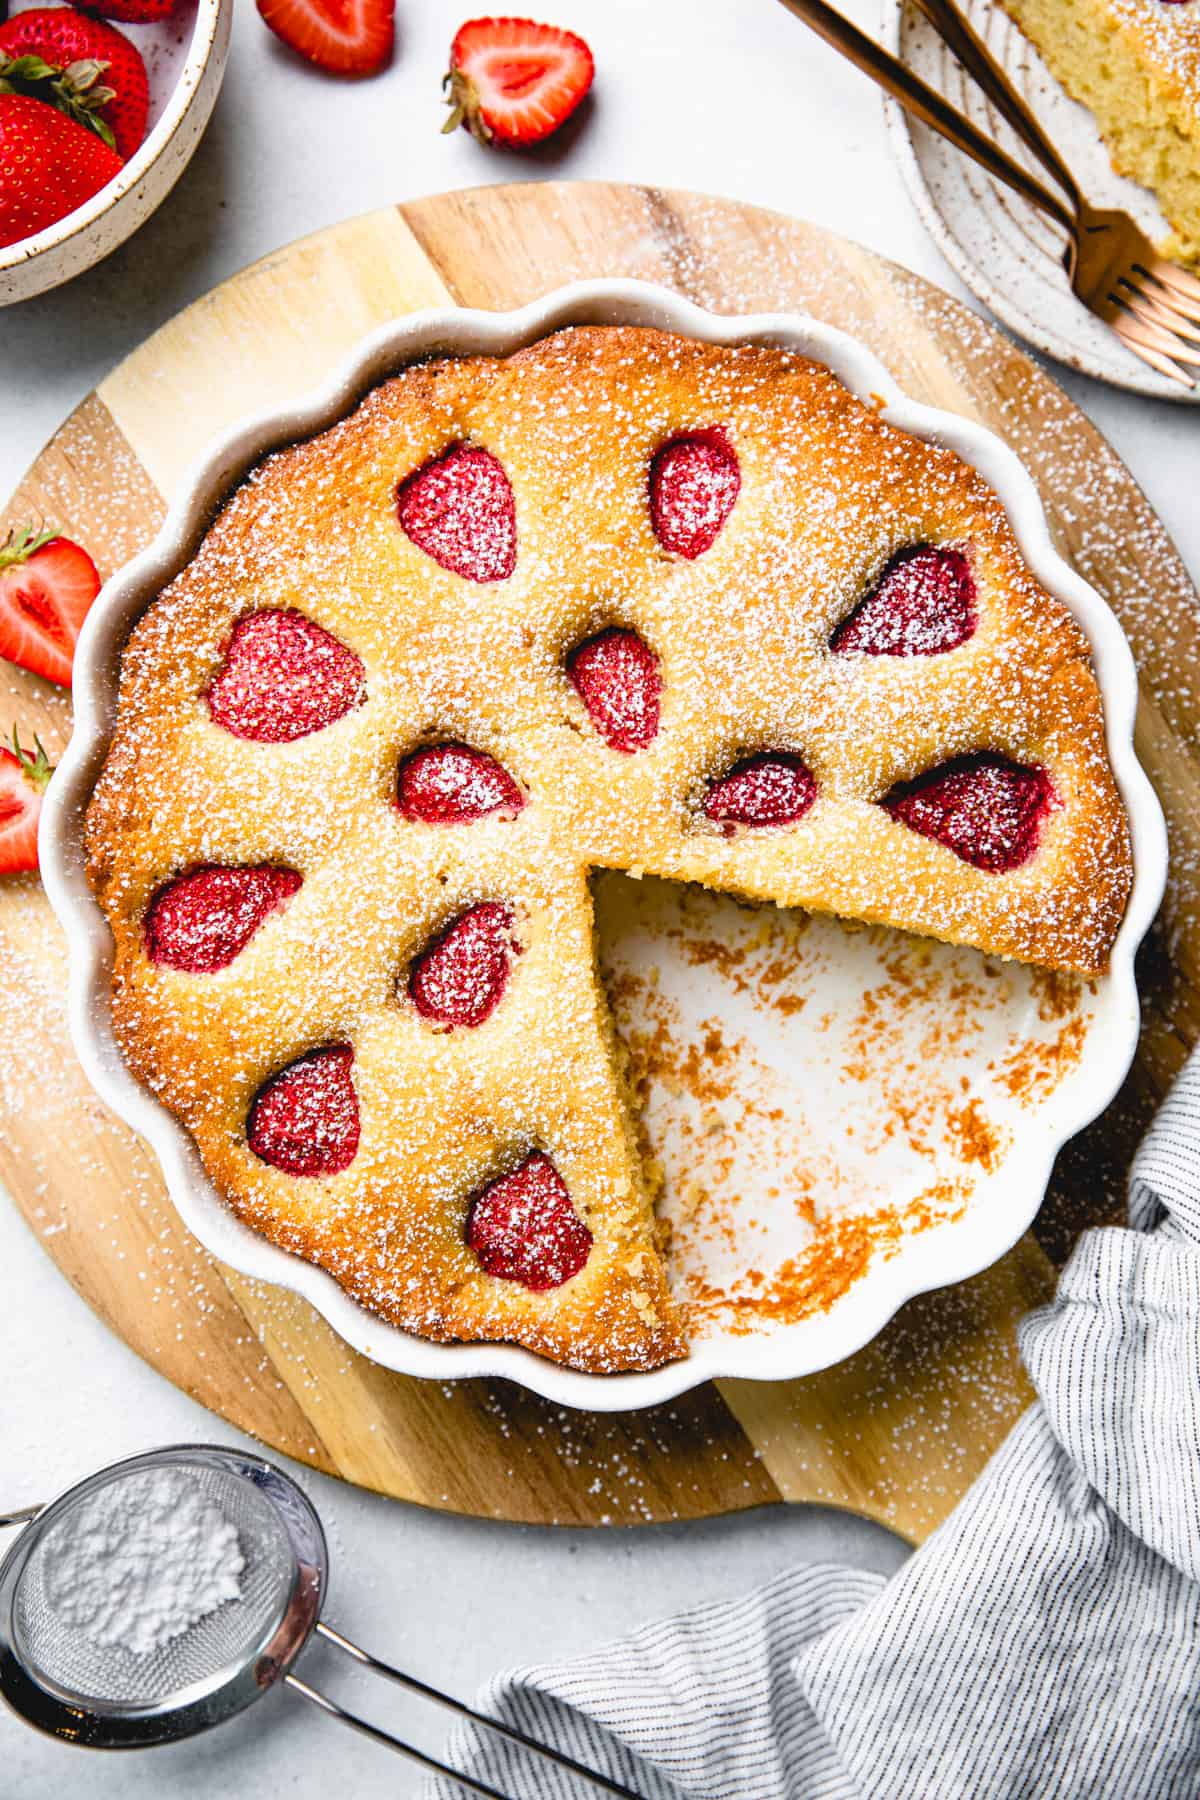 A vanilla coffee cake, topped with strawberries, in a white round baking pan on a wooden board.